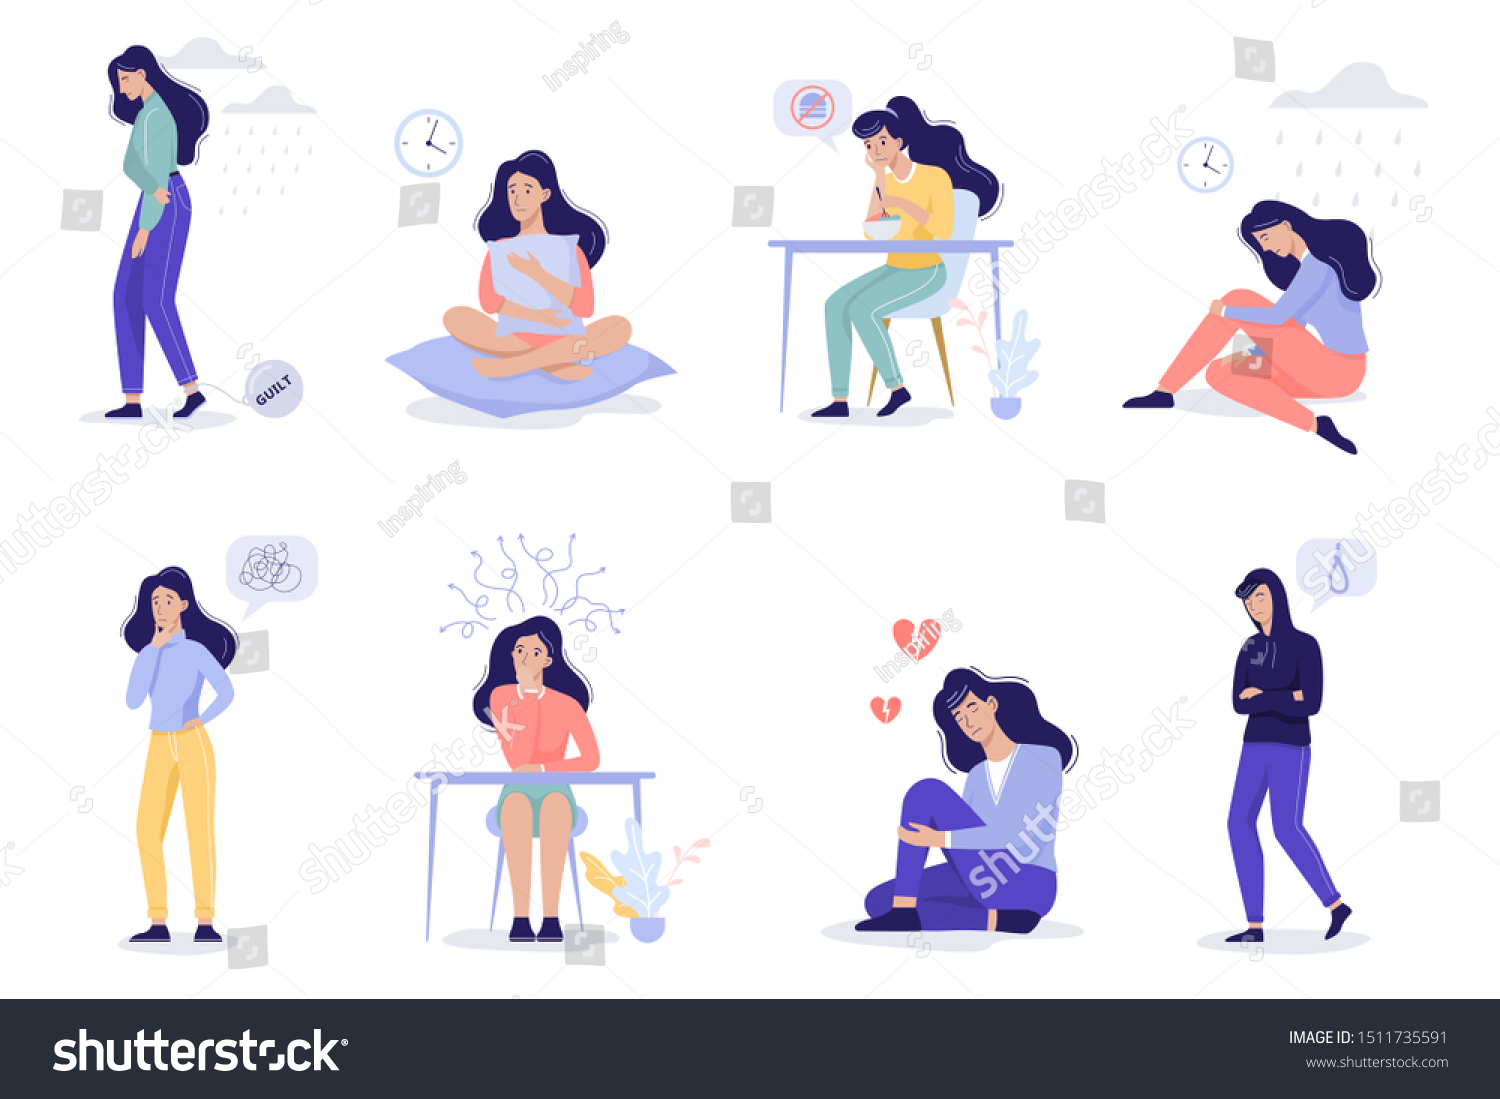 Depression Signs Symptom Infographic People Mental Stock Vector Royalty Free 1511735591 3061